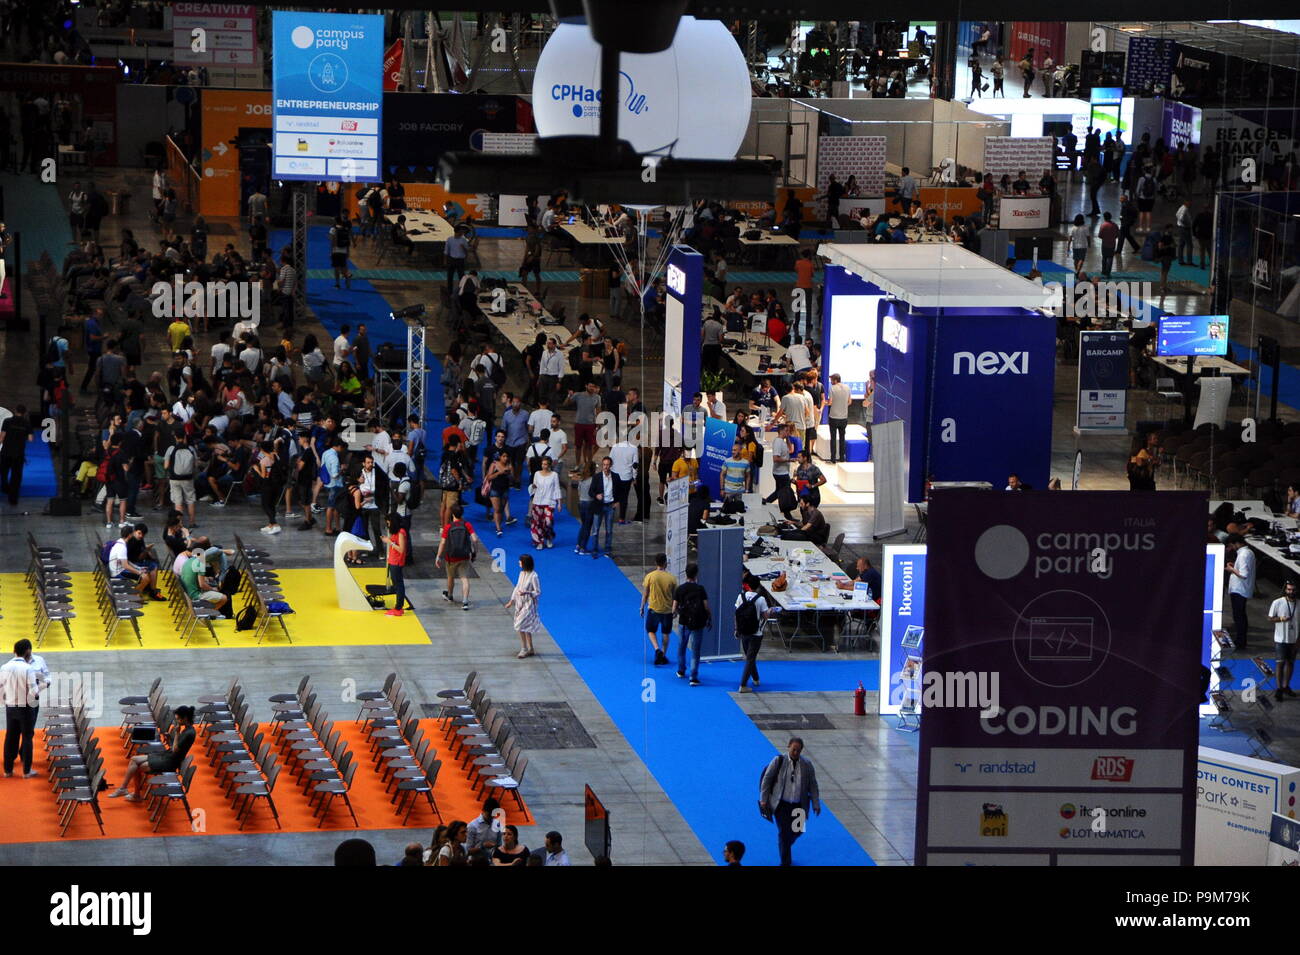 Campus Party at the Fiera di Rho Pero Milan (Maurizio Maule, Milan -  2018-07-19) ps the photo is usable in respect of the context in which it  was taken, and without the